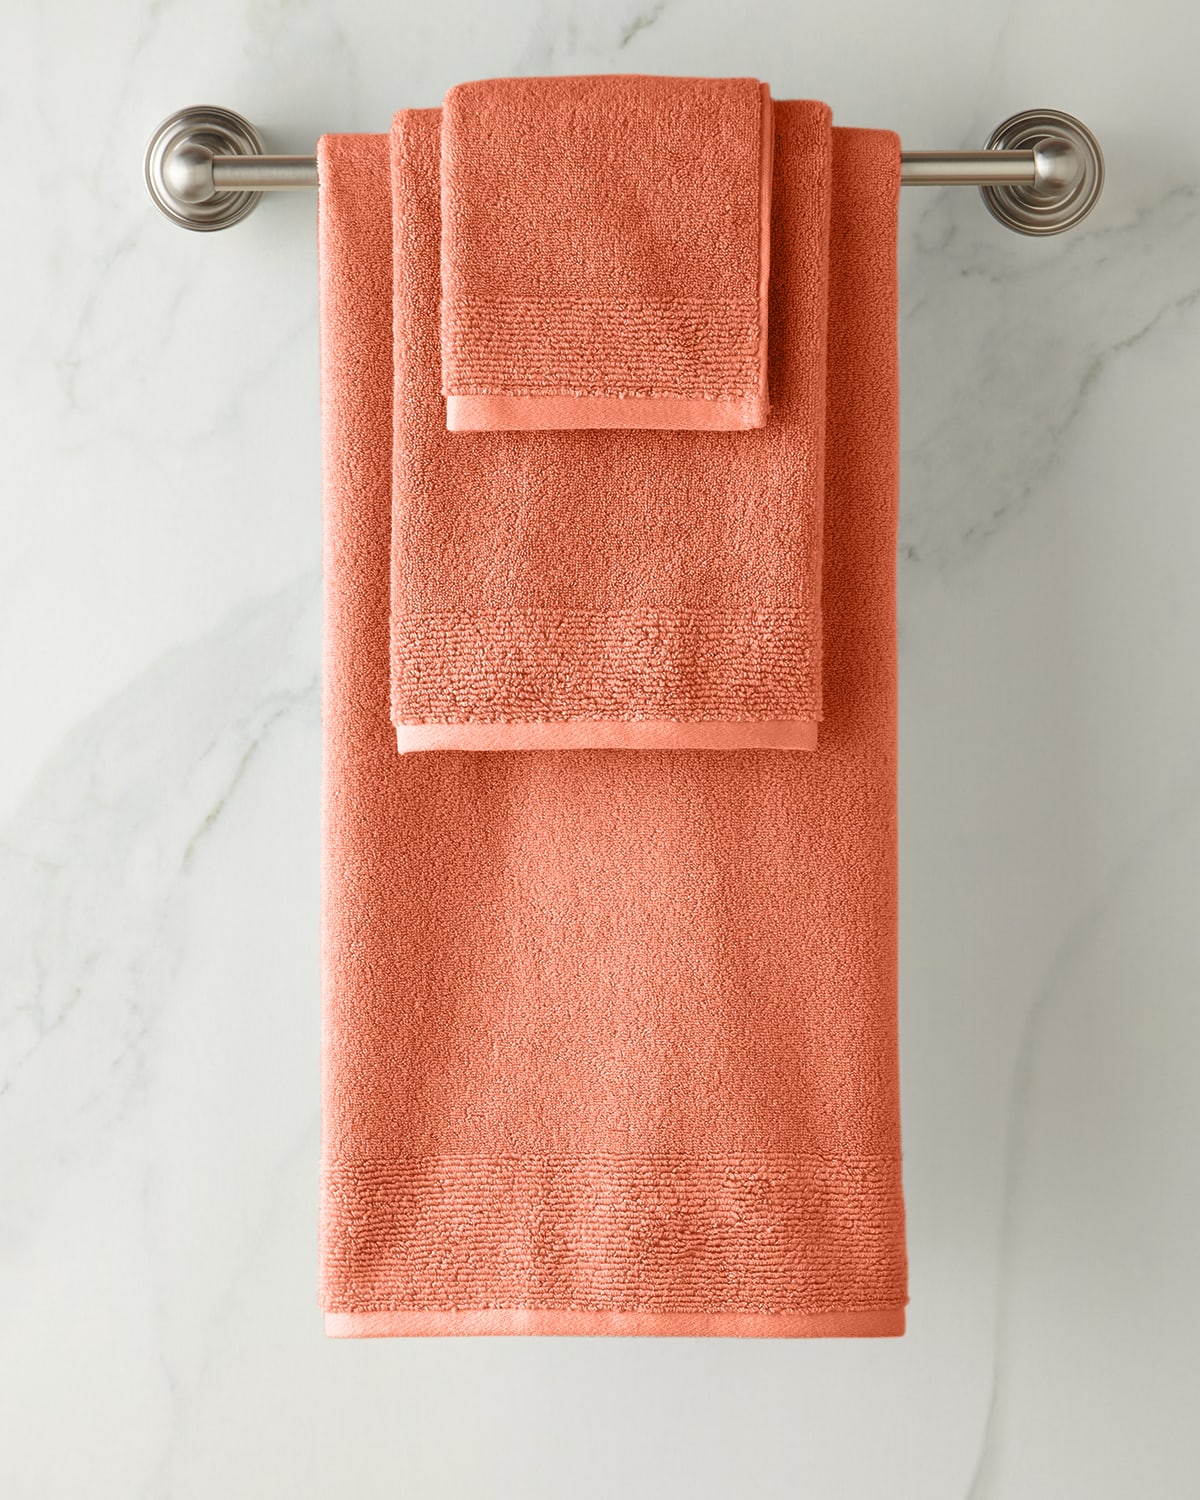 Kassatex Kyoto Face Cloth In Coral